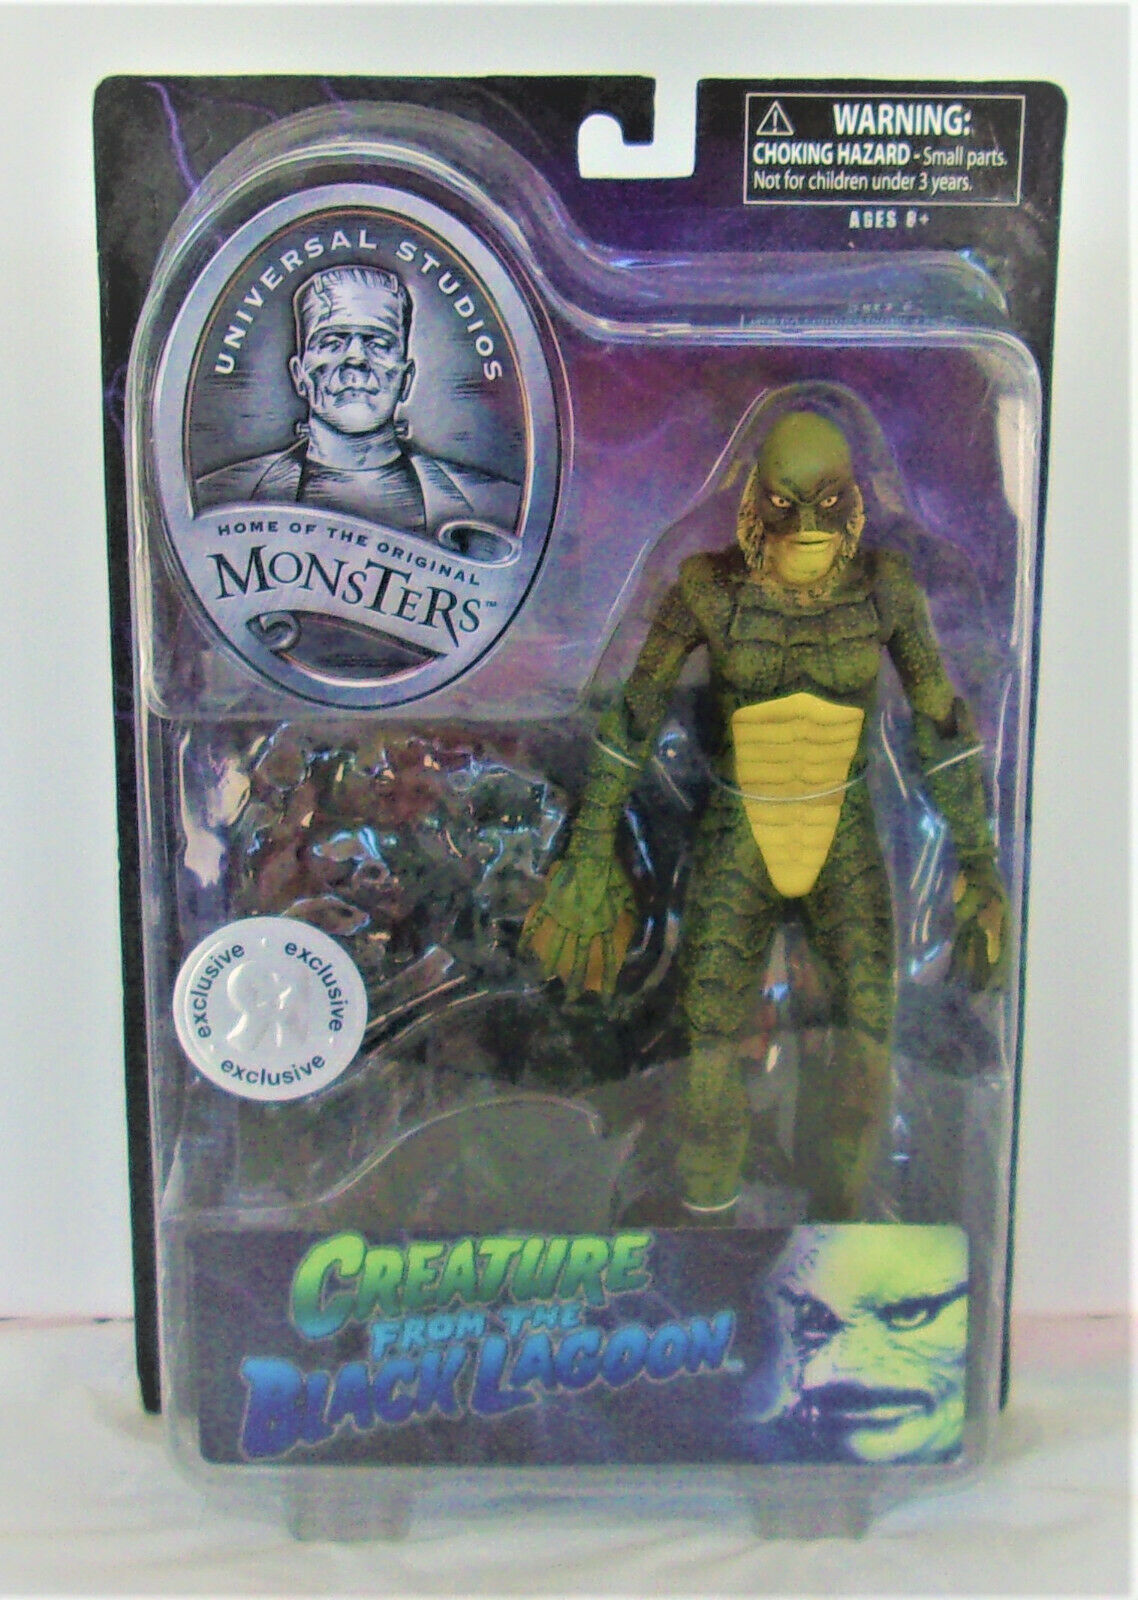 New Creature from the Black Lagoon Universal Studios Toys R Us Exclusive